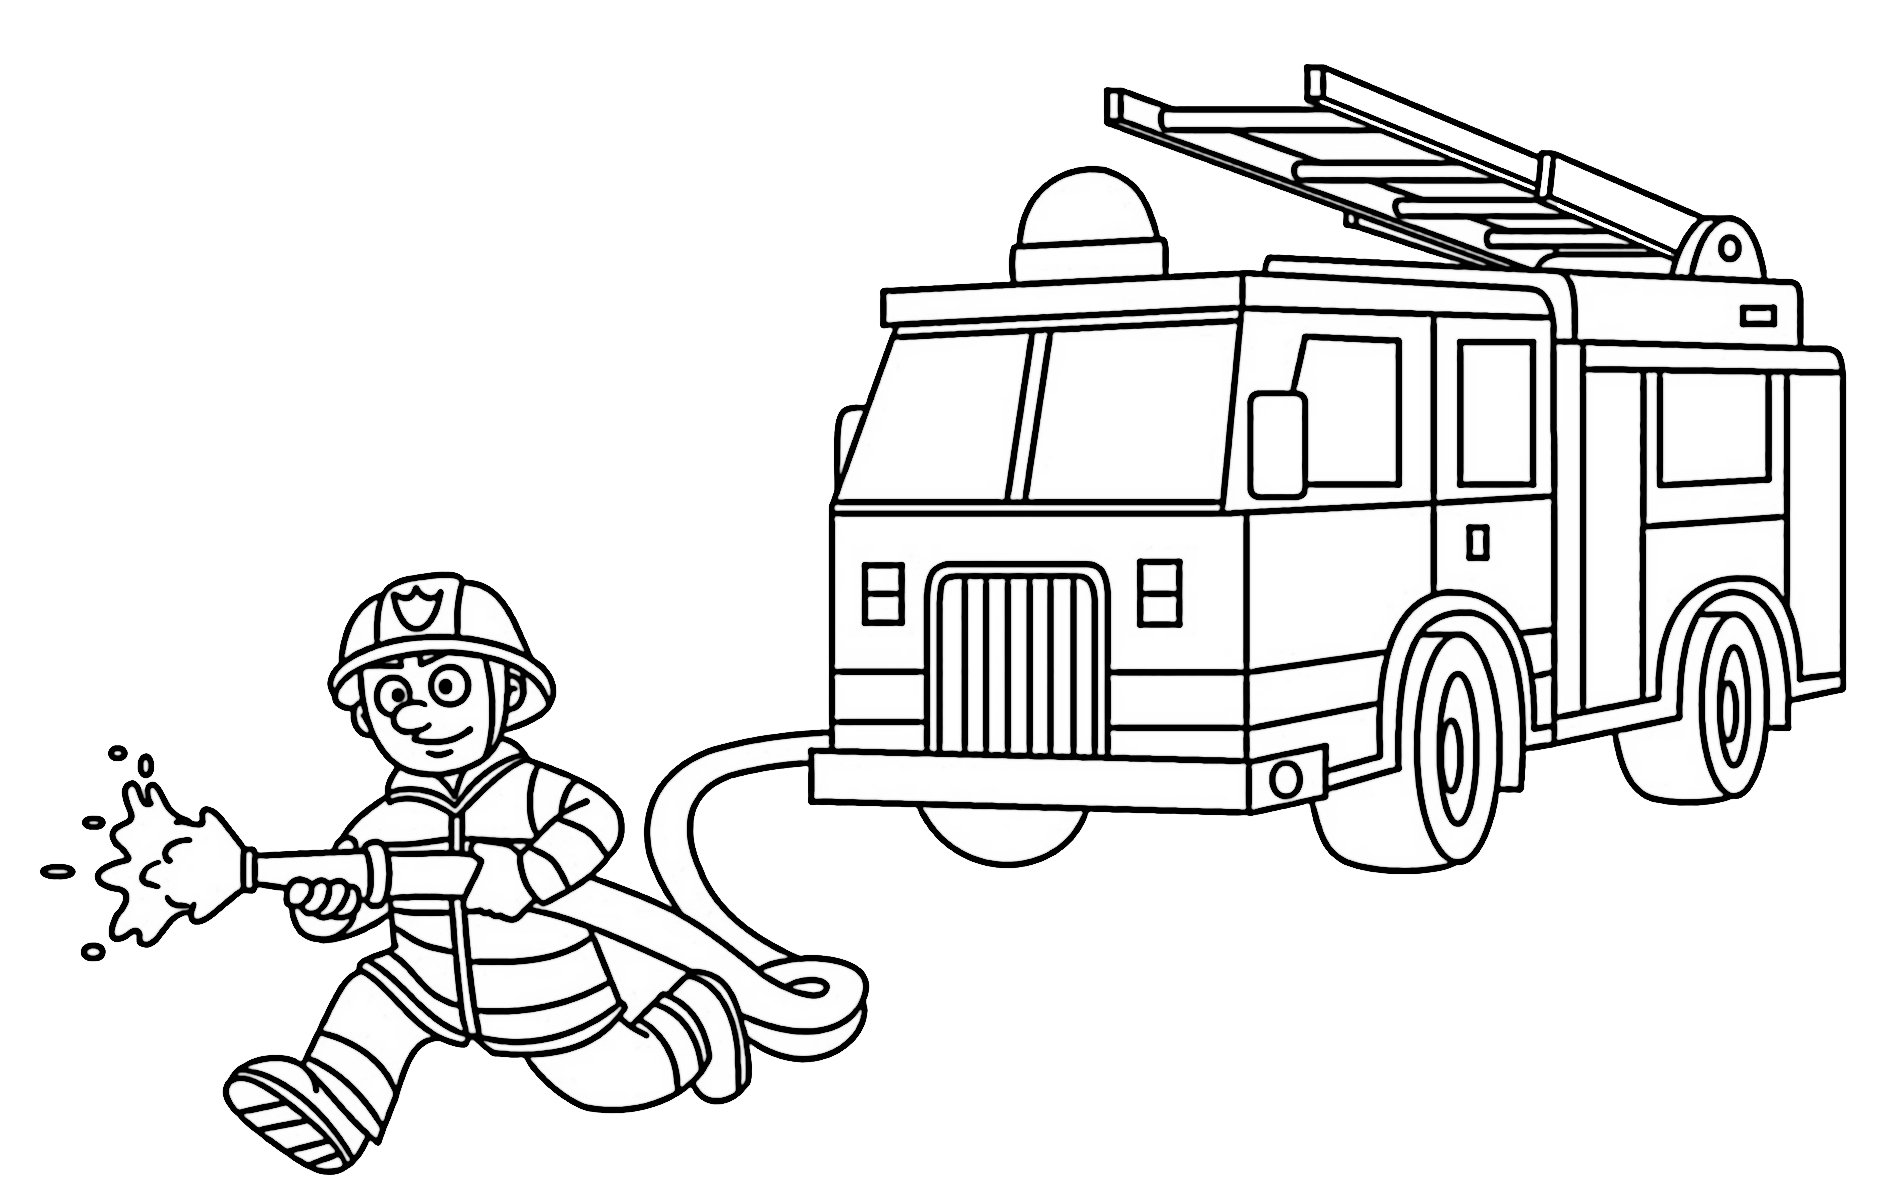 Coloring page exciting firefighting equipment